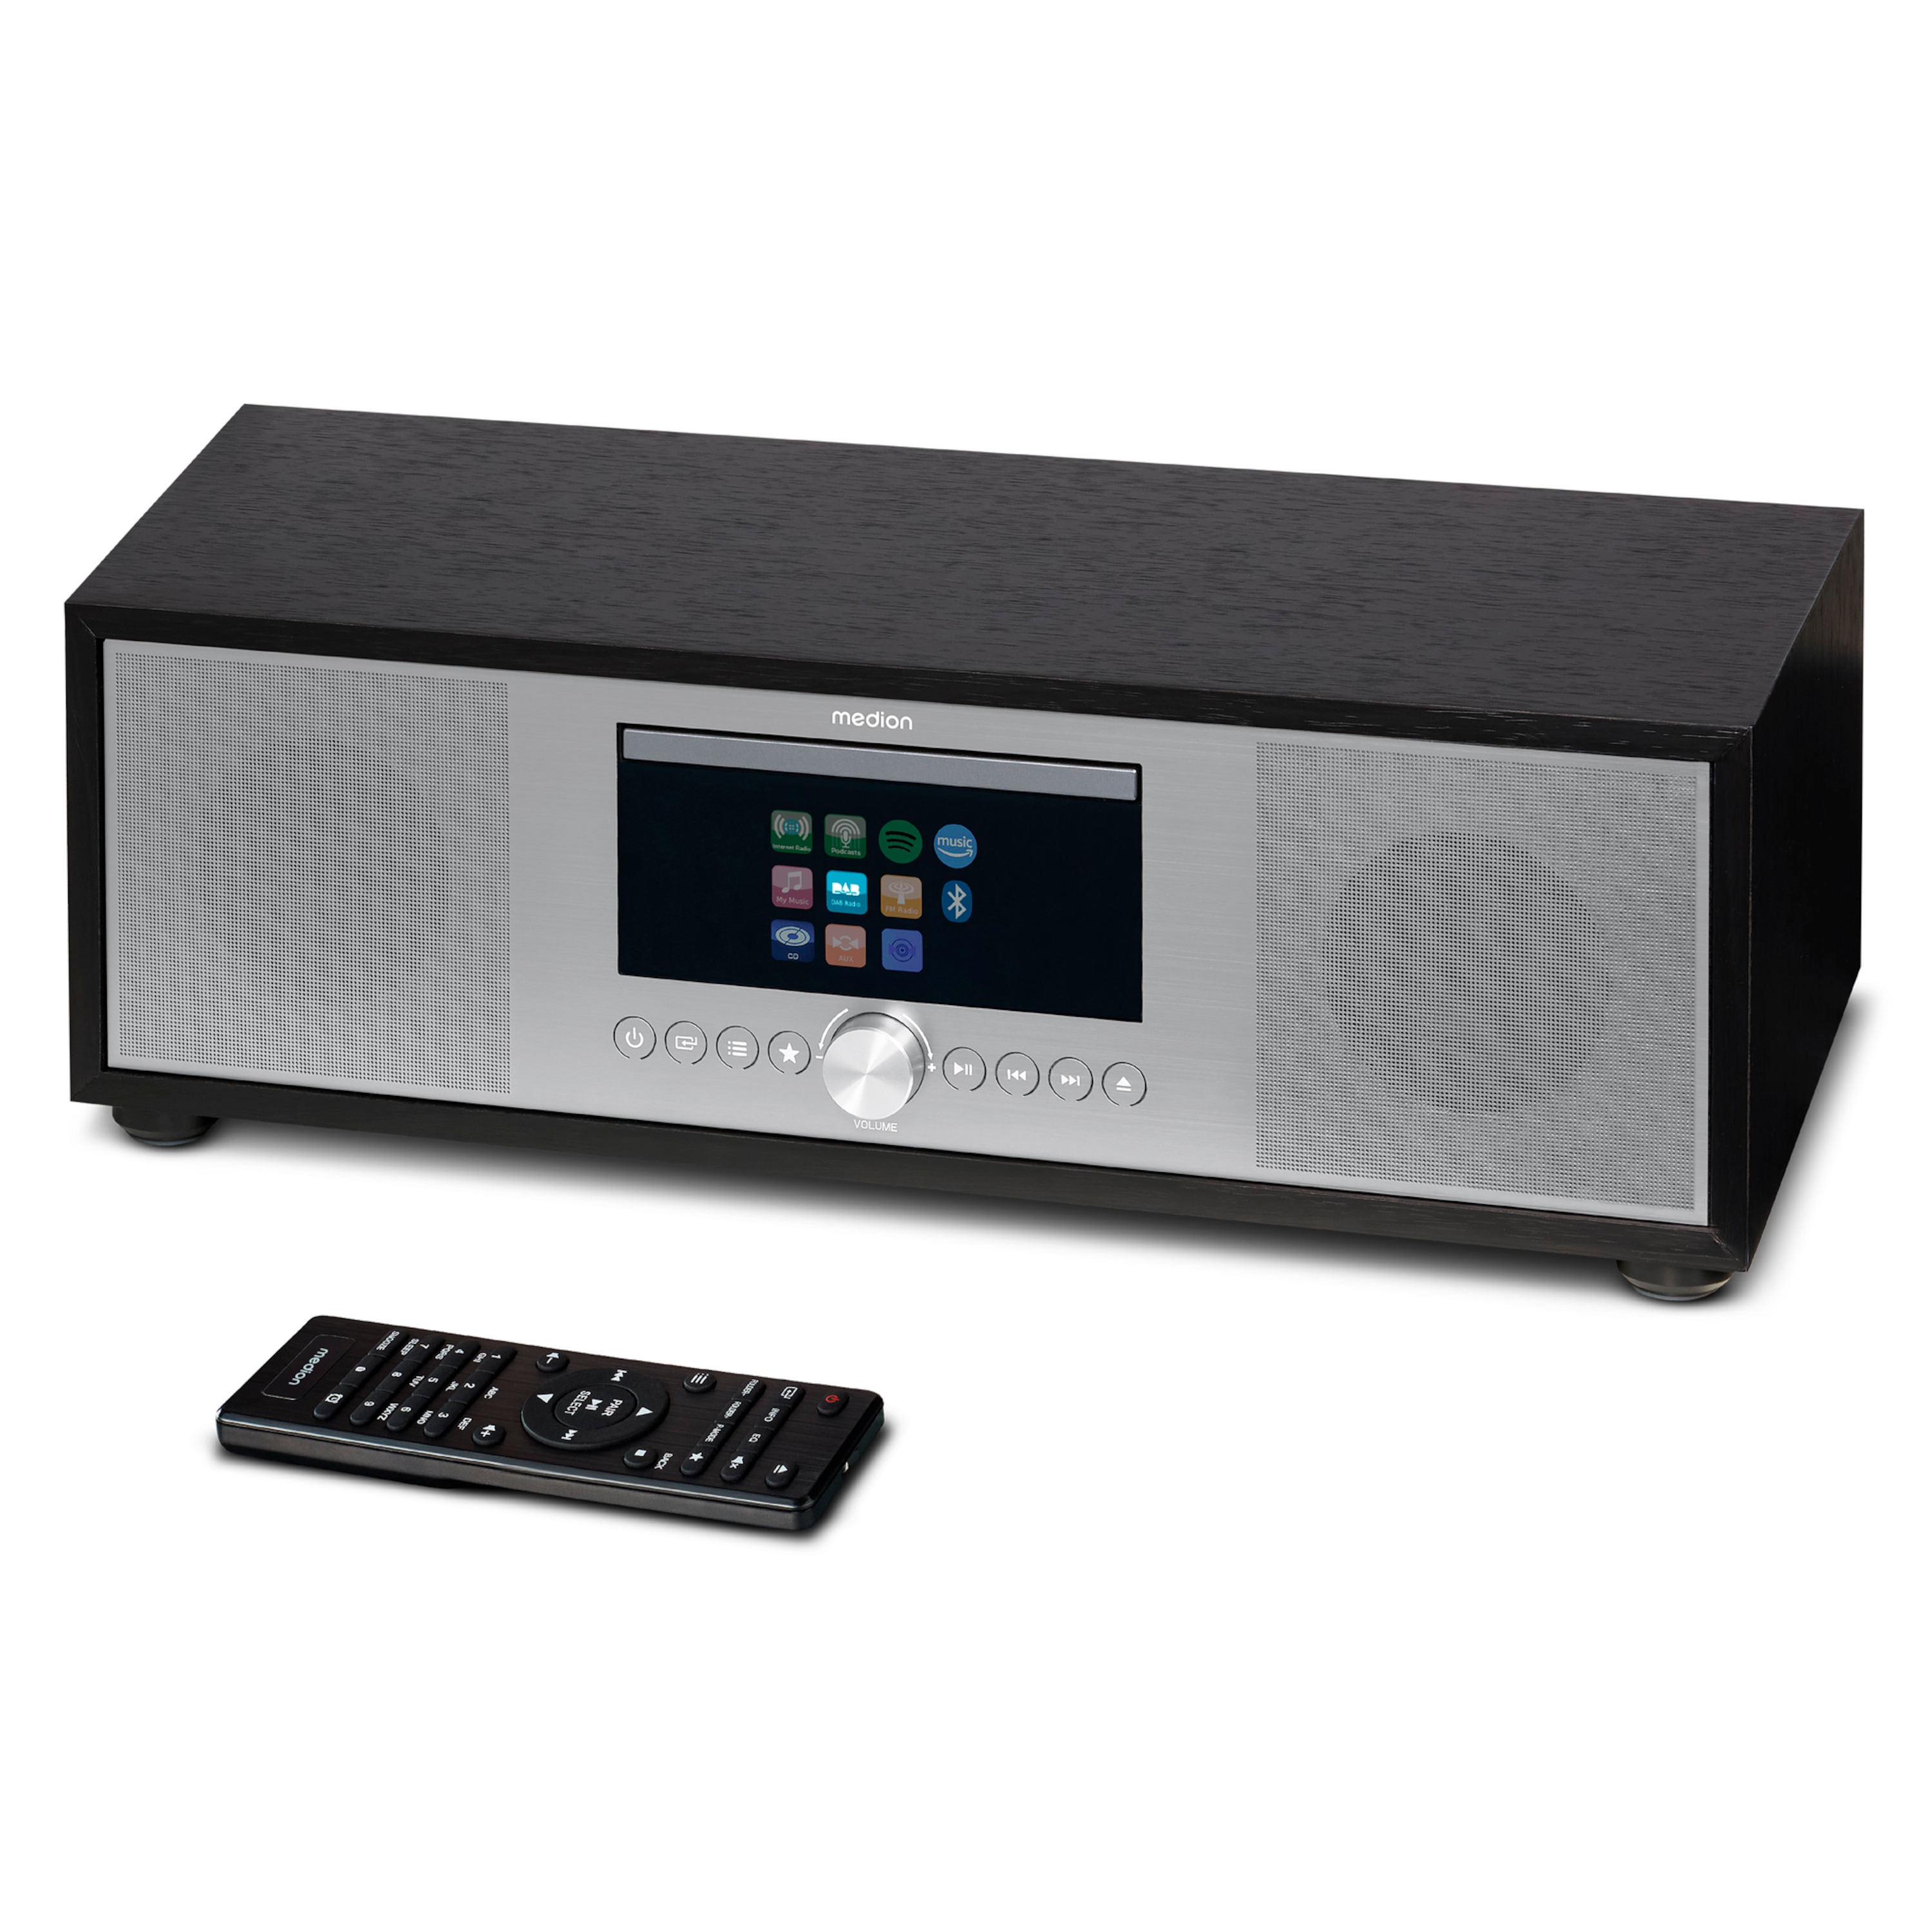 MEDION® LIFE® P66400 All-in-One Audio System silber, LCD-Display 7,1 (2.8''), Internet/DAB+/PLL-UKW Radio, CD/MP3-Player, Bluetooth®, WLAN, RDS, 2.1 Soundsystem, 2 x 20 W + 40 W RMS